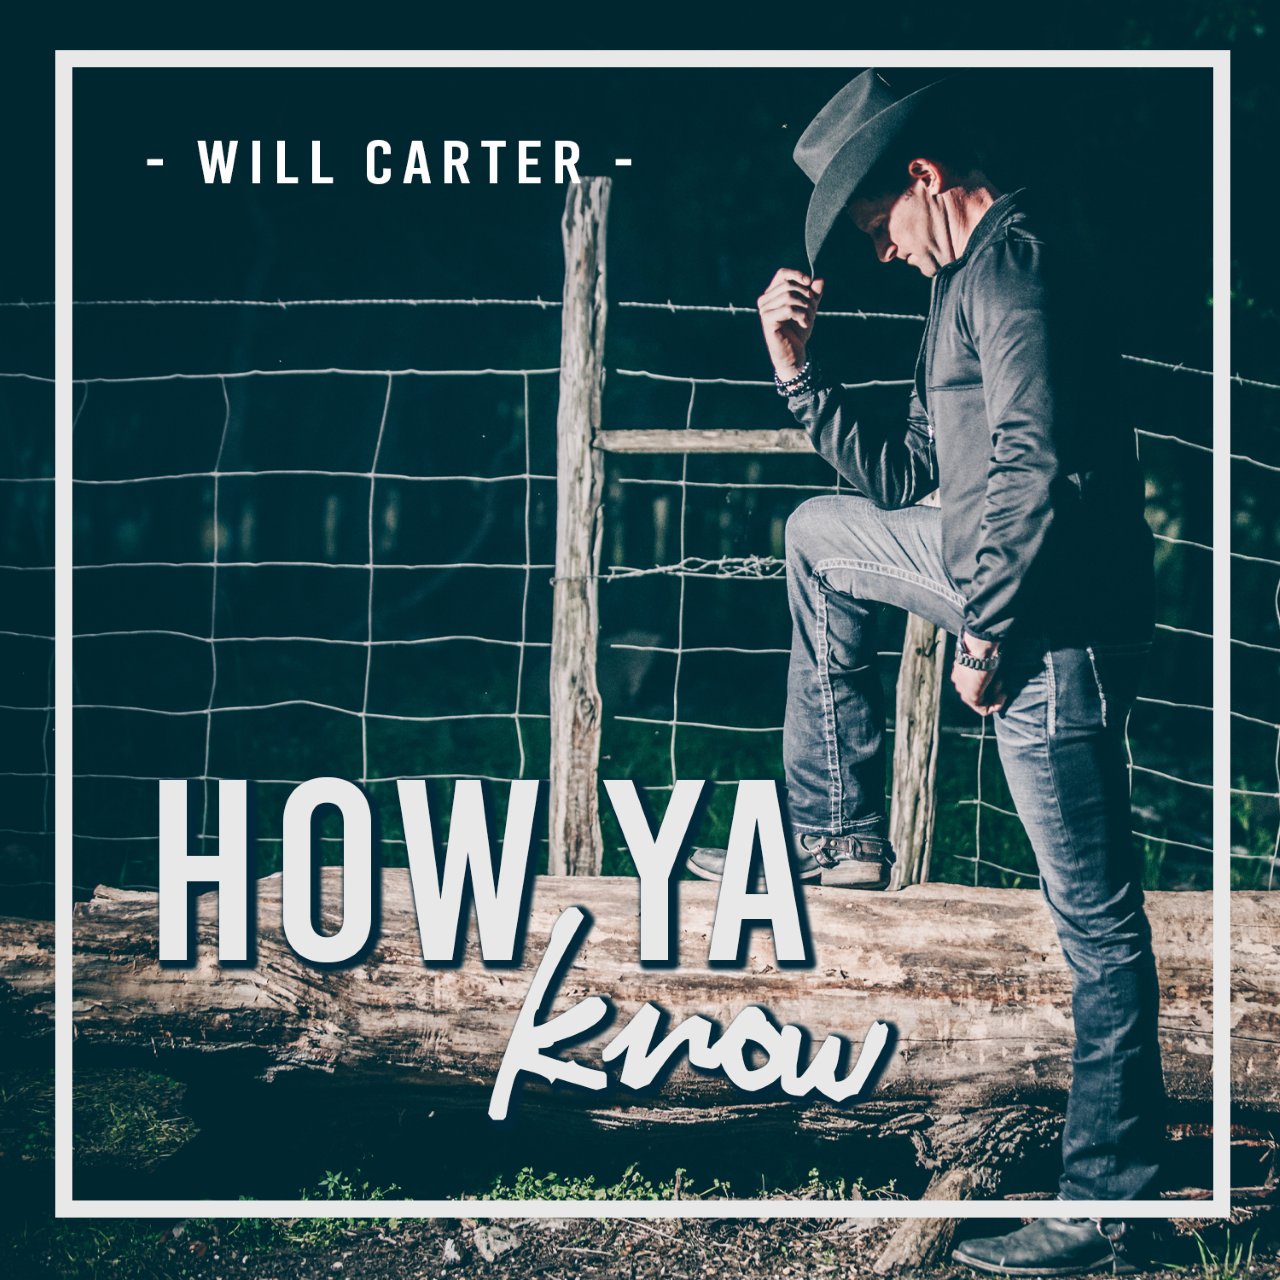 Will Carter's newest album is How Ya Know